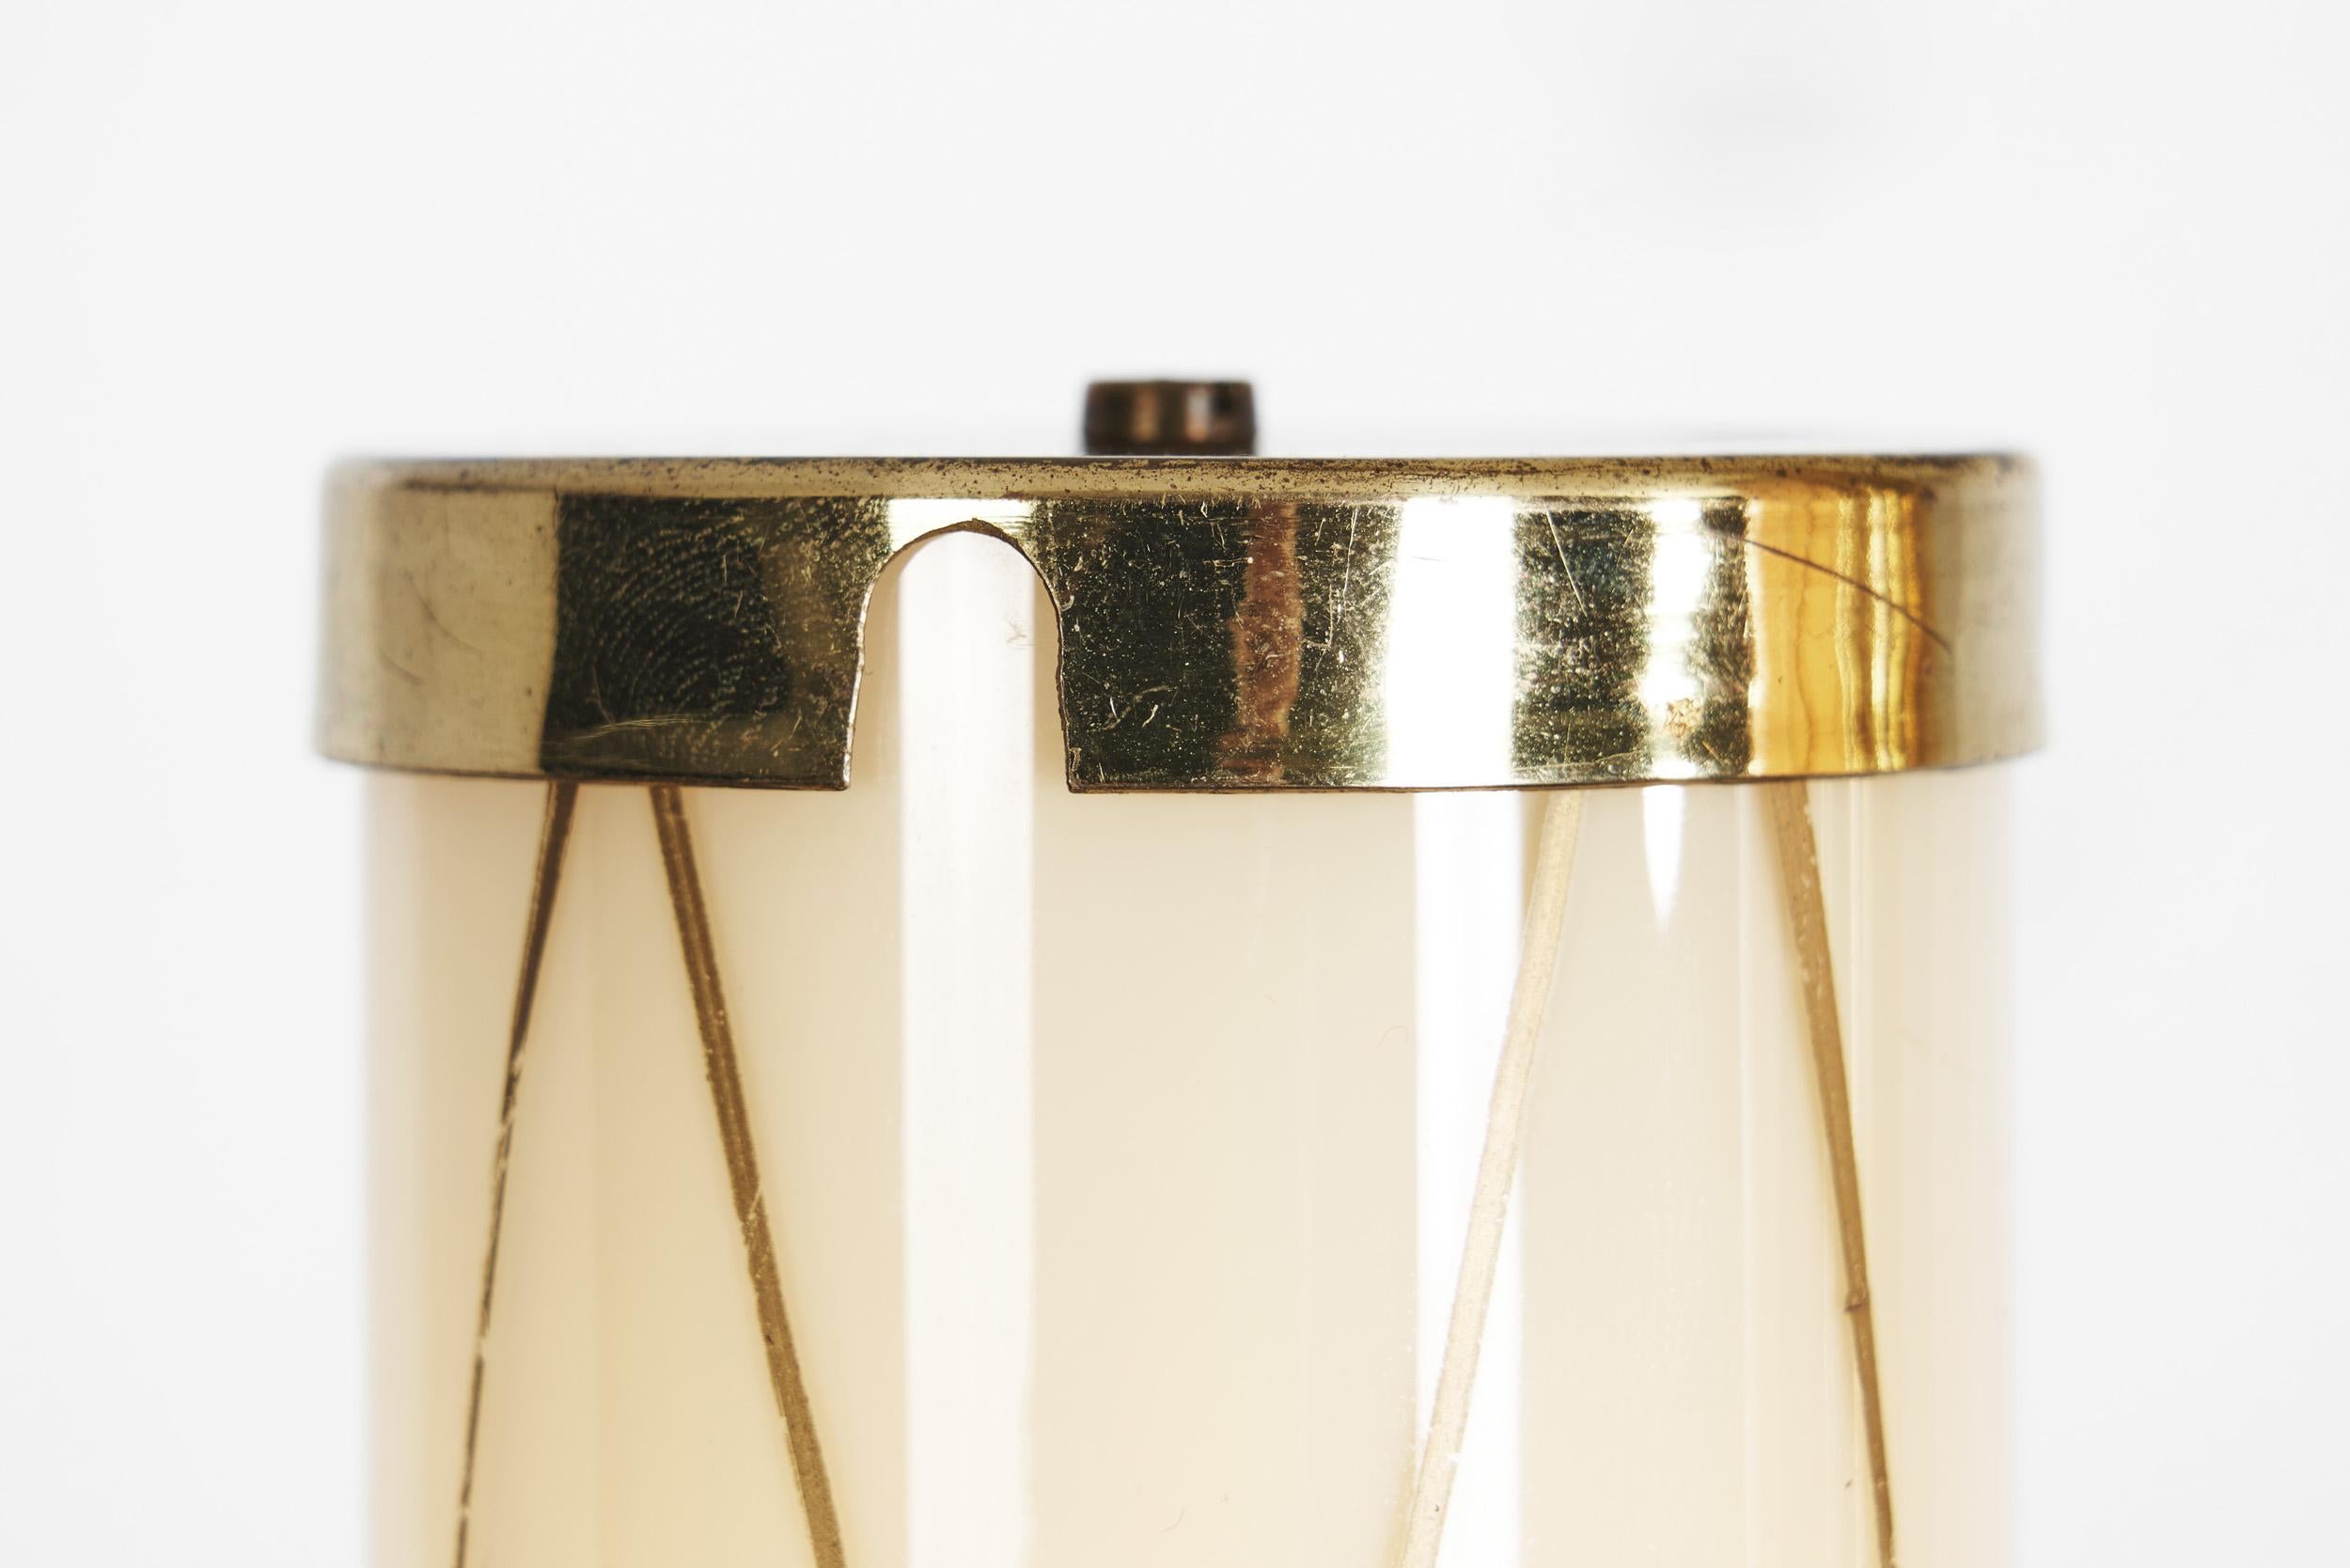 Brass Ceiling Lamp with Decorative Cylindrical Glass Shades, Europe Ca 1950s For Sale 8